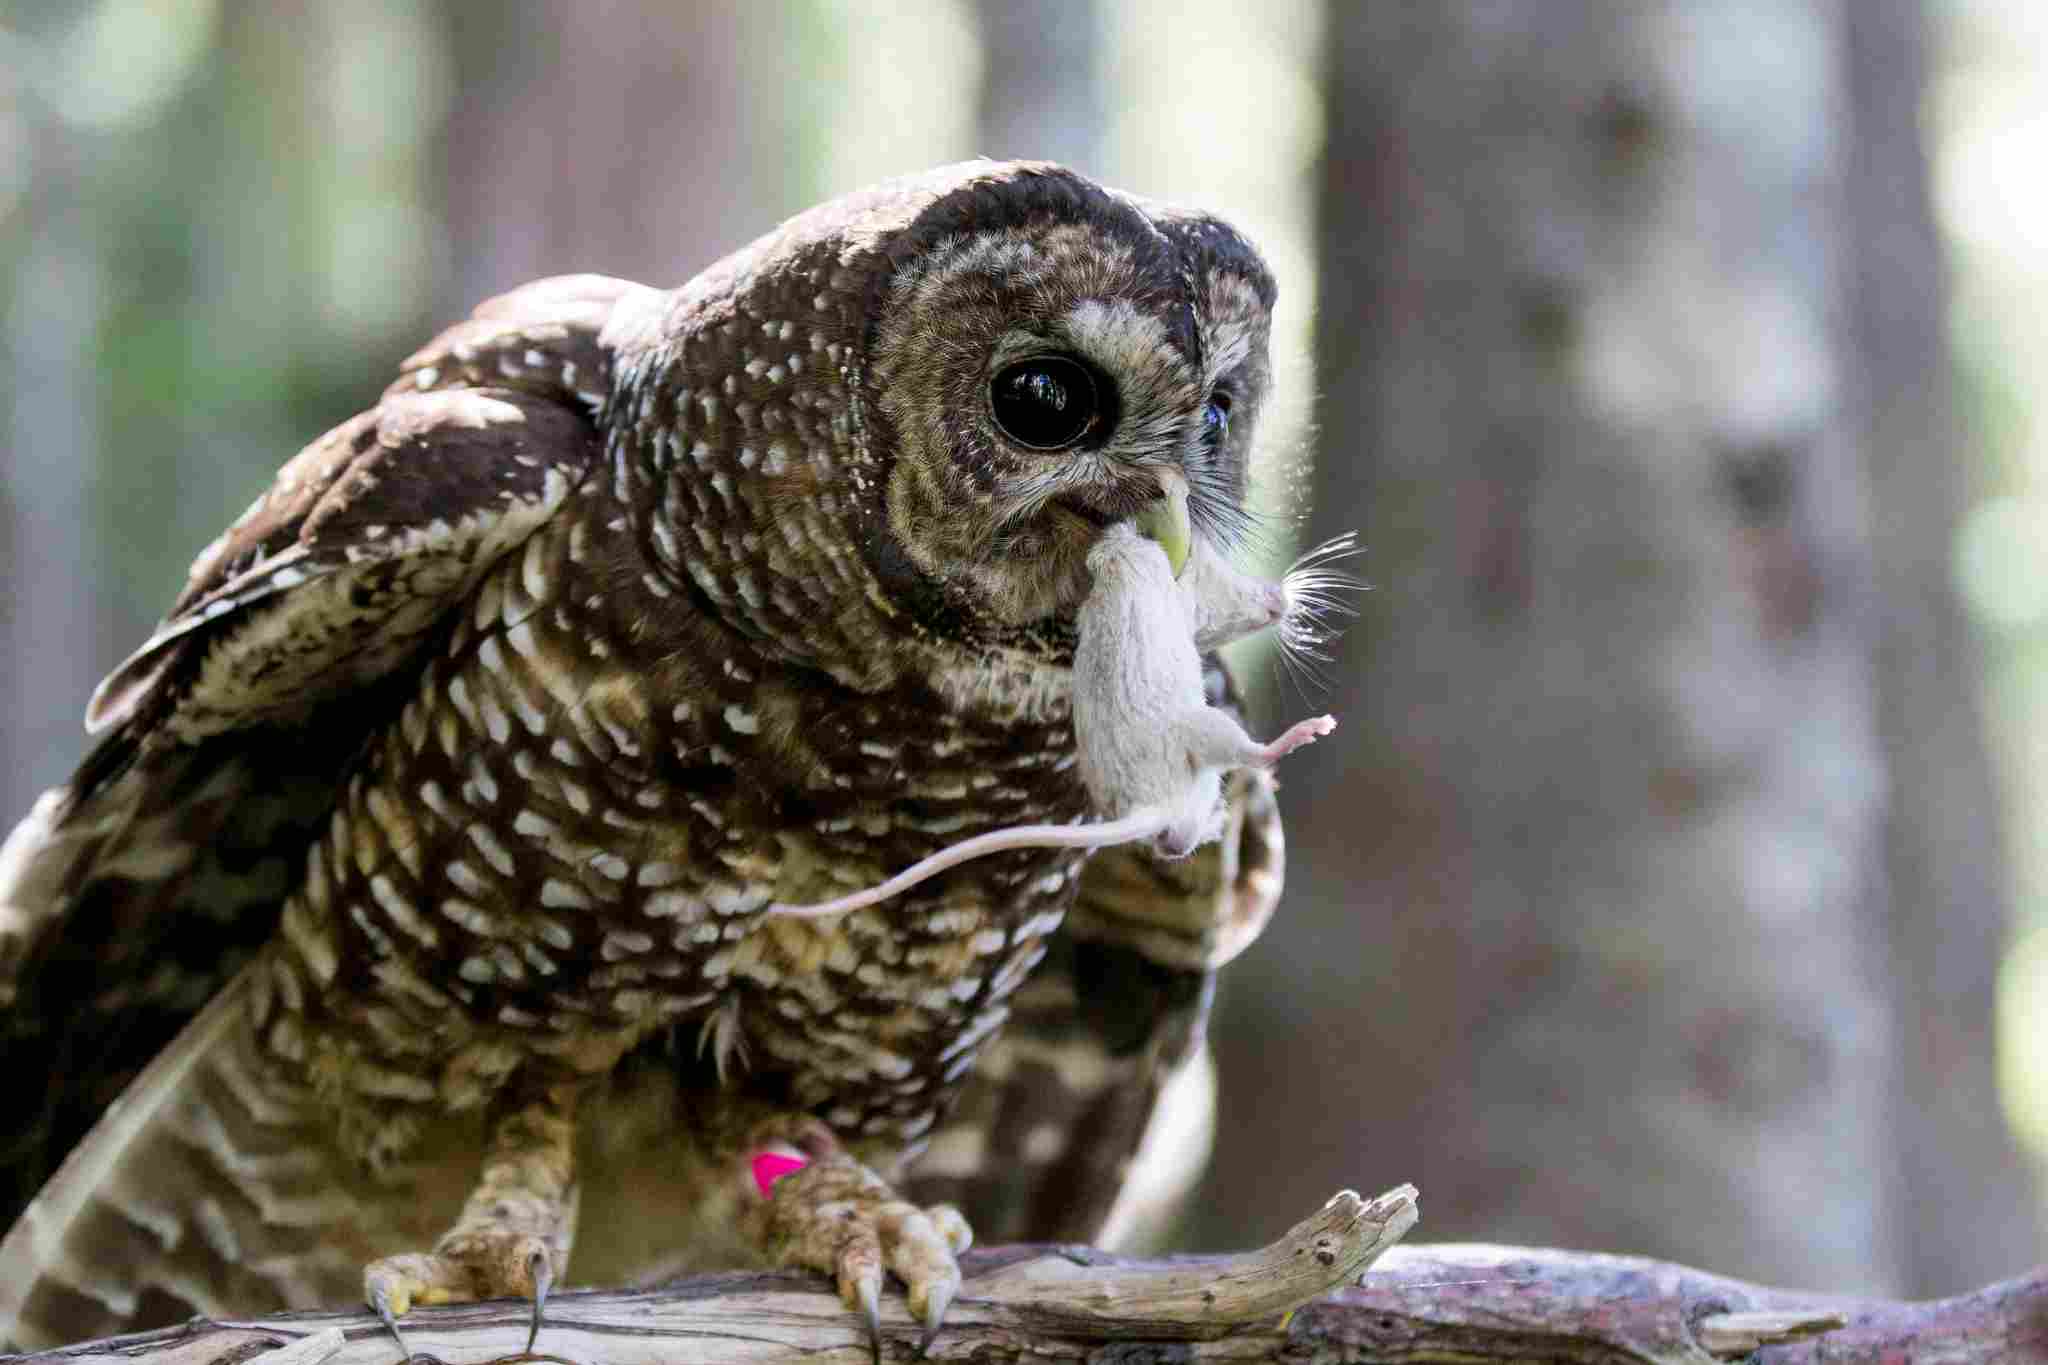 Can You Eat Owls: Some Threatened Species Like the Spotted Owl are Legally Protected from Hunting in Many Areas (Credit: Mount Rainier National Park 2014 .CC BY 2.0.)